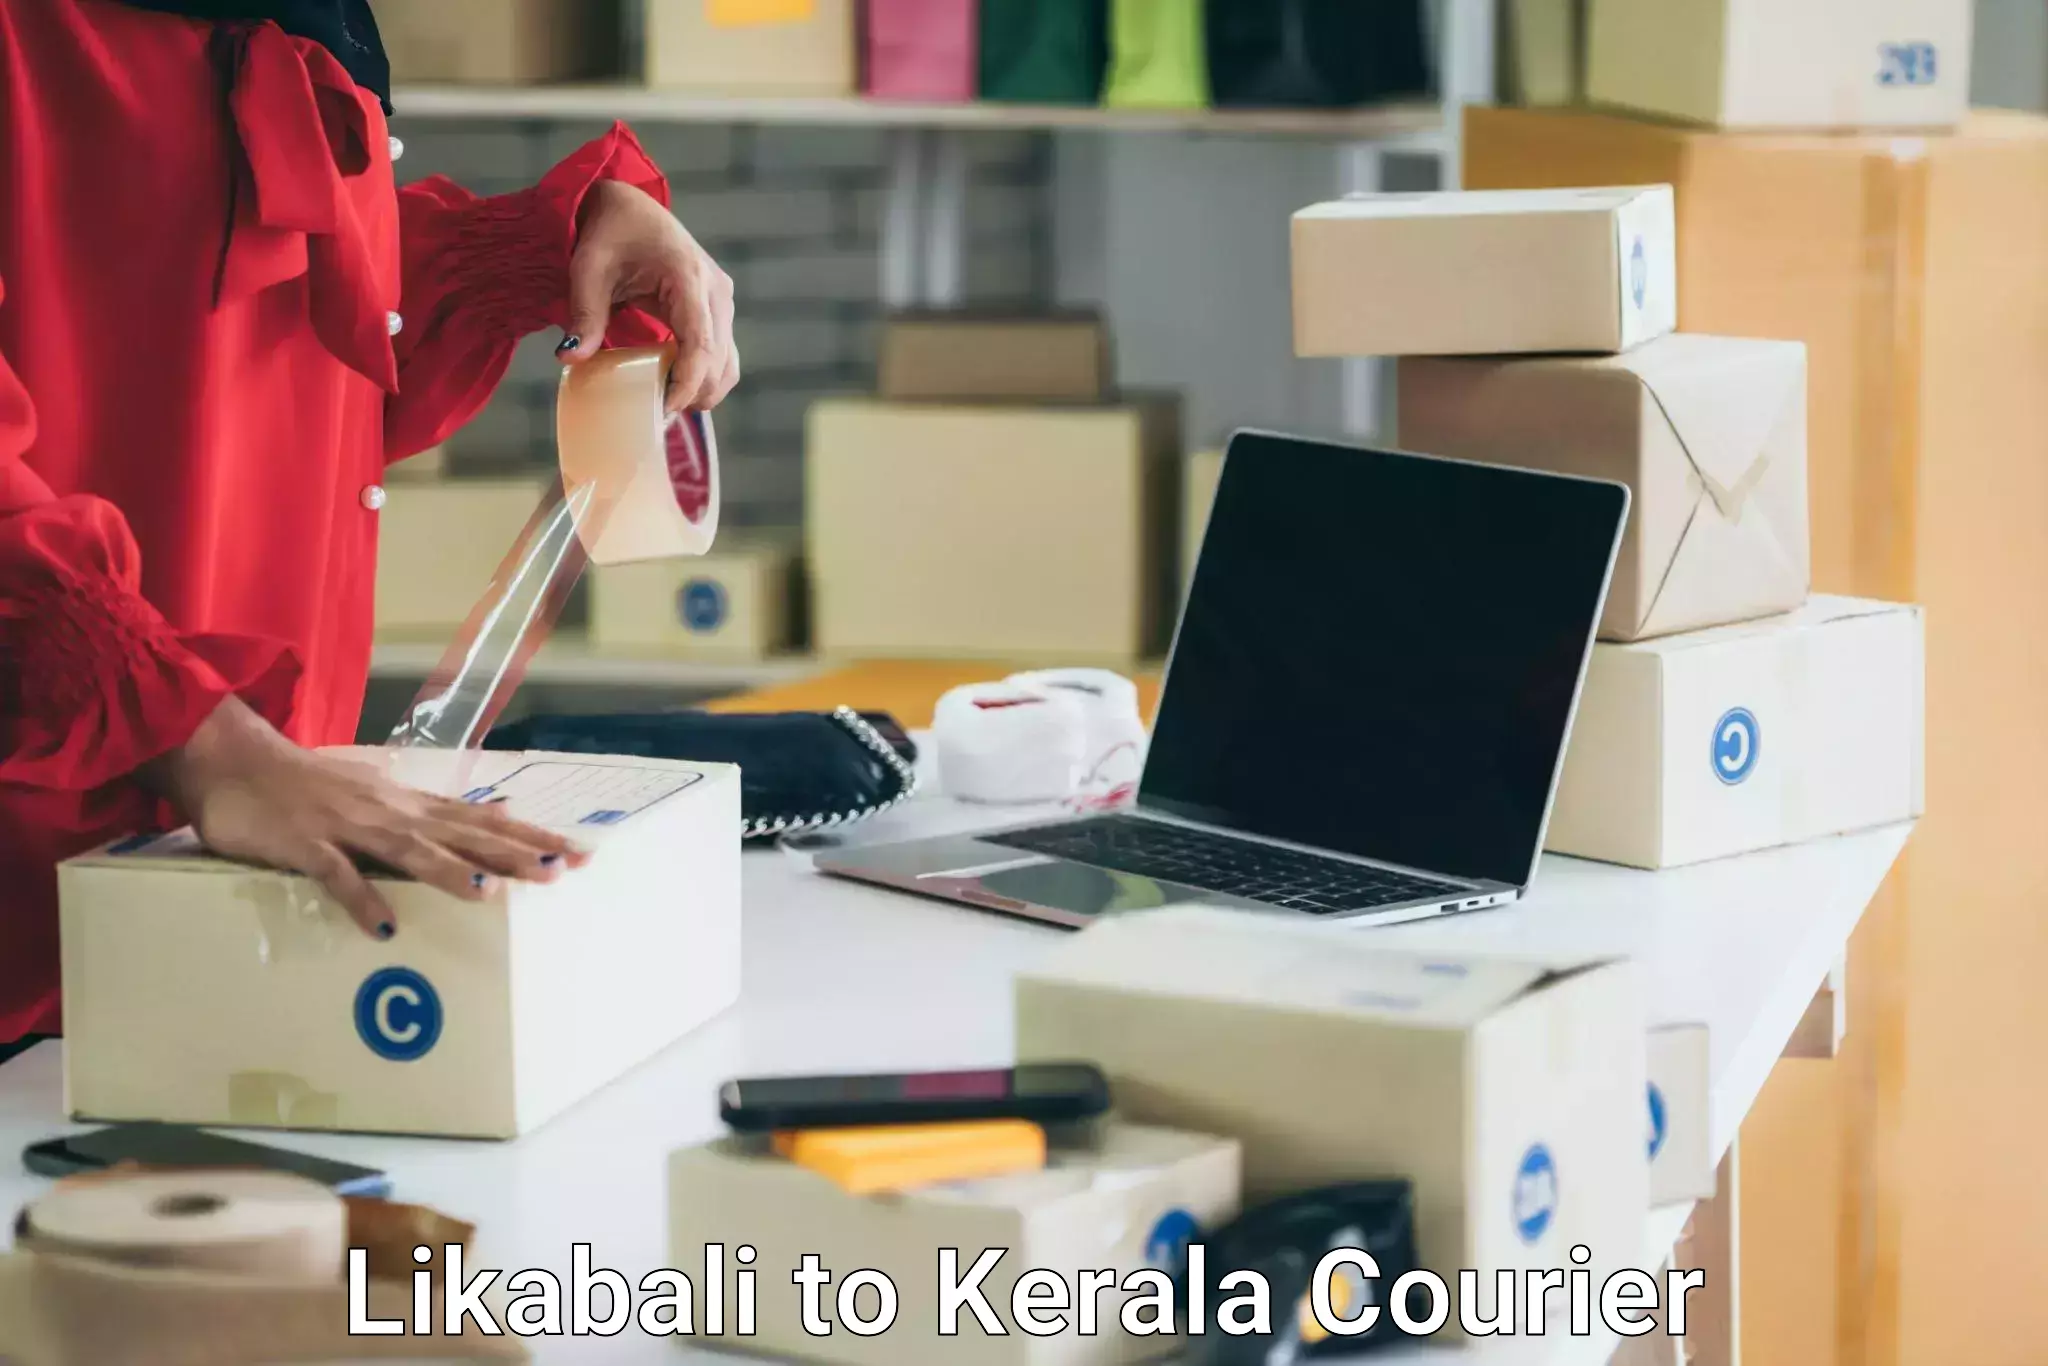 Quality moving services Likabali to Kerala